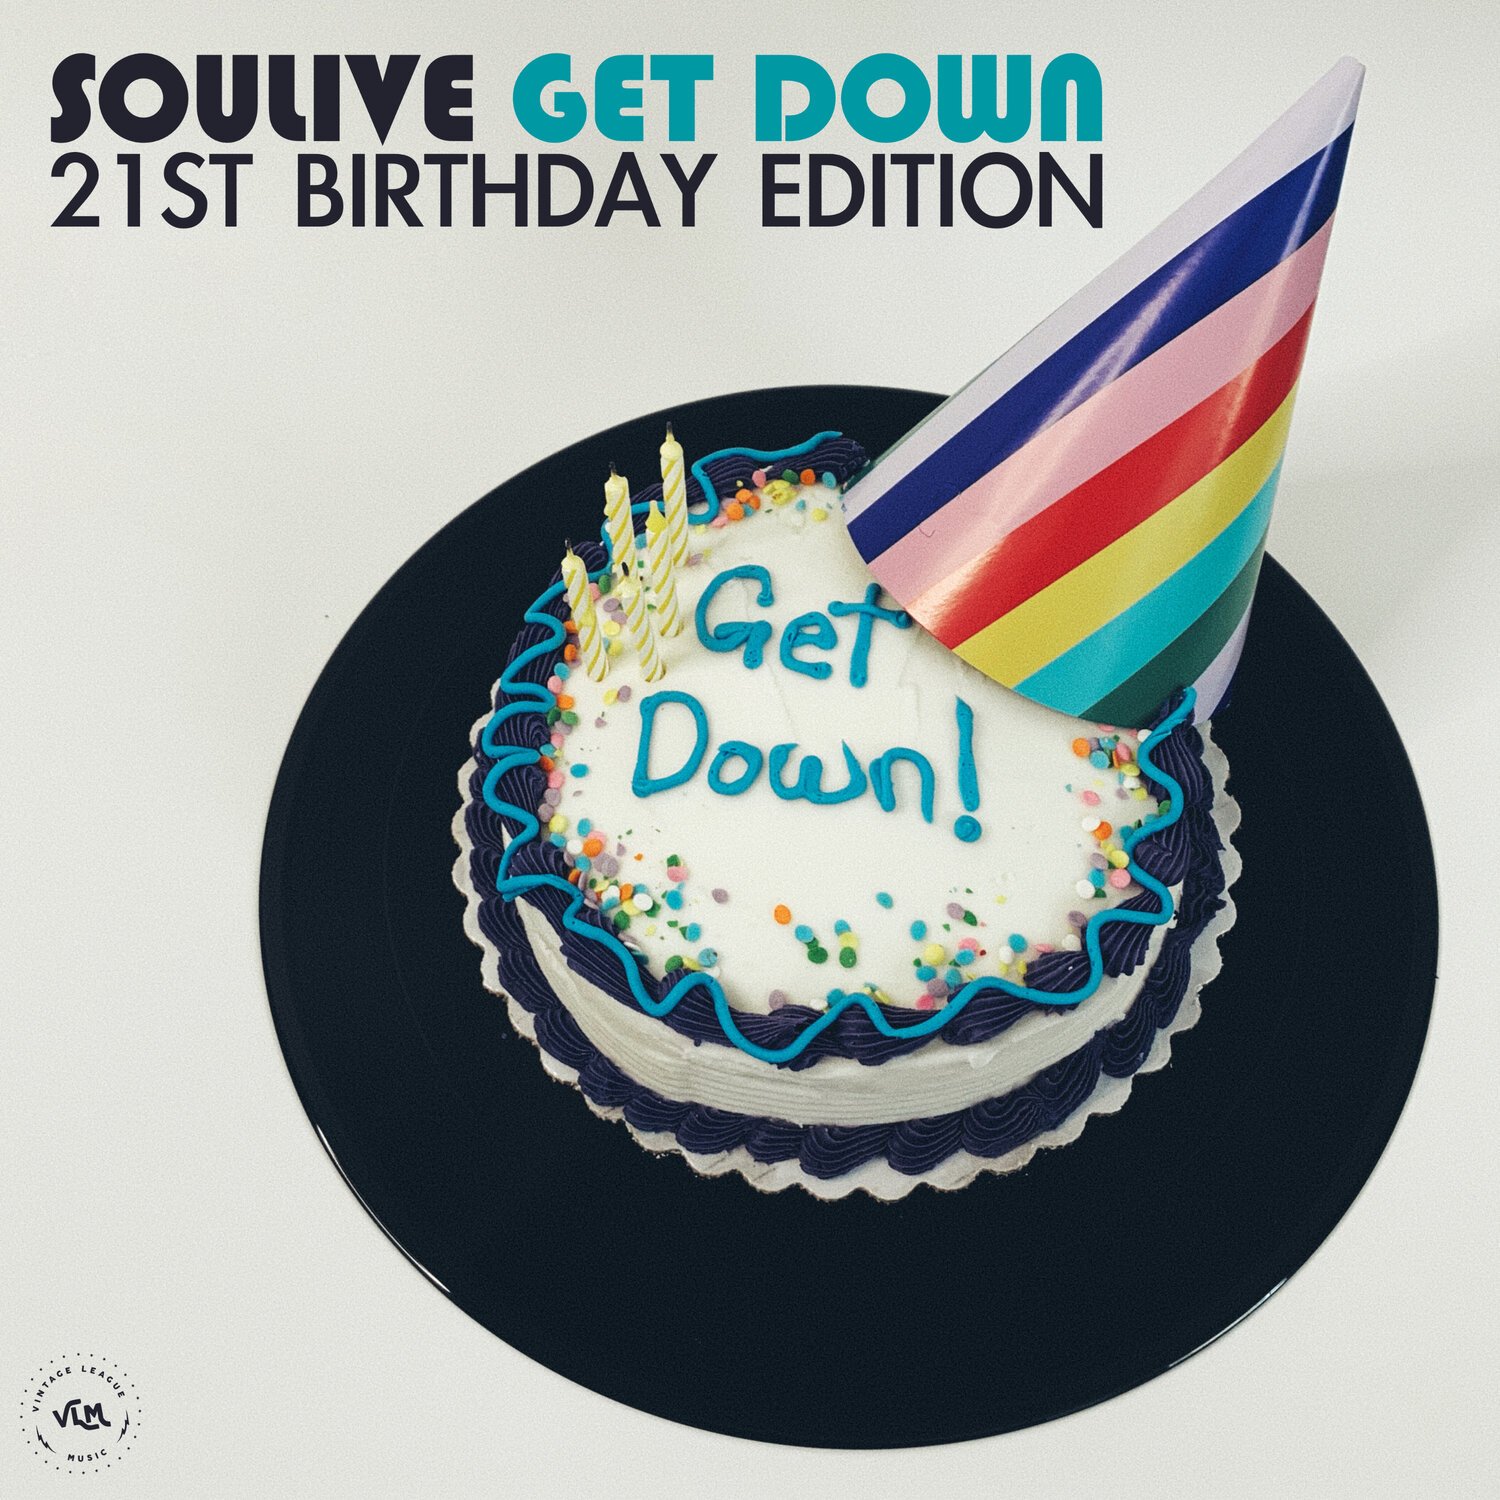 Soulive Get Down 21st Birthday Edition.jpeg